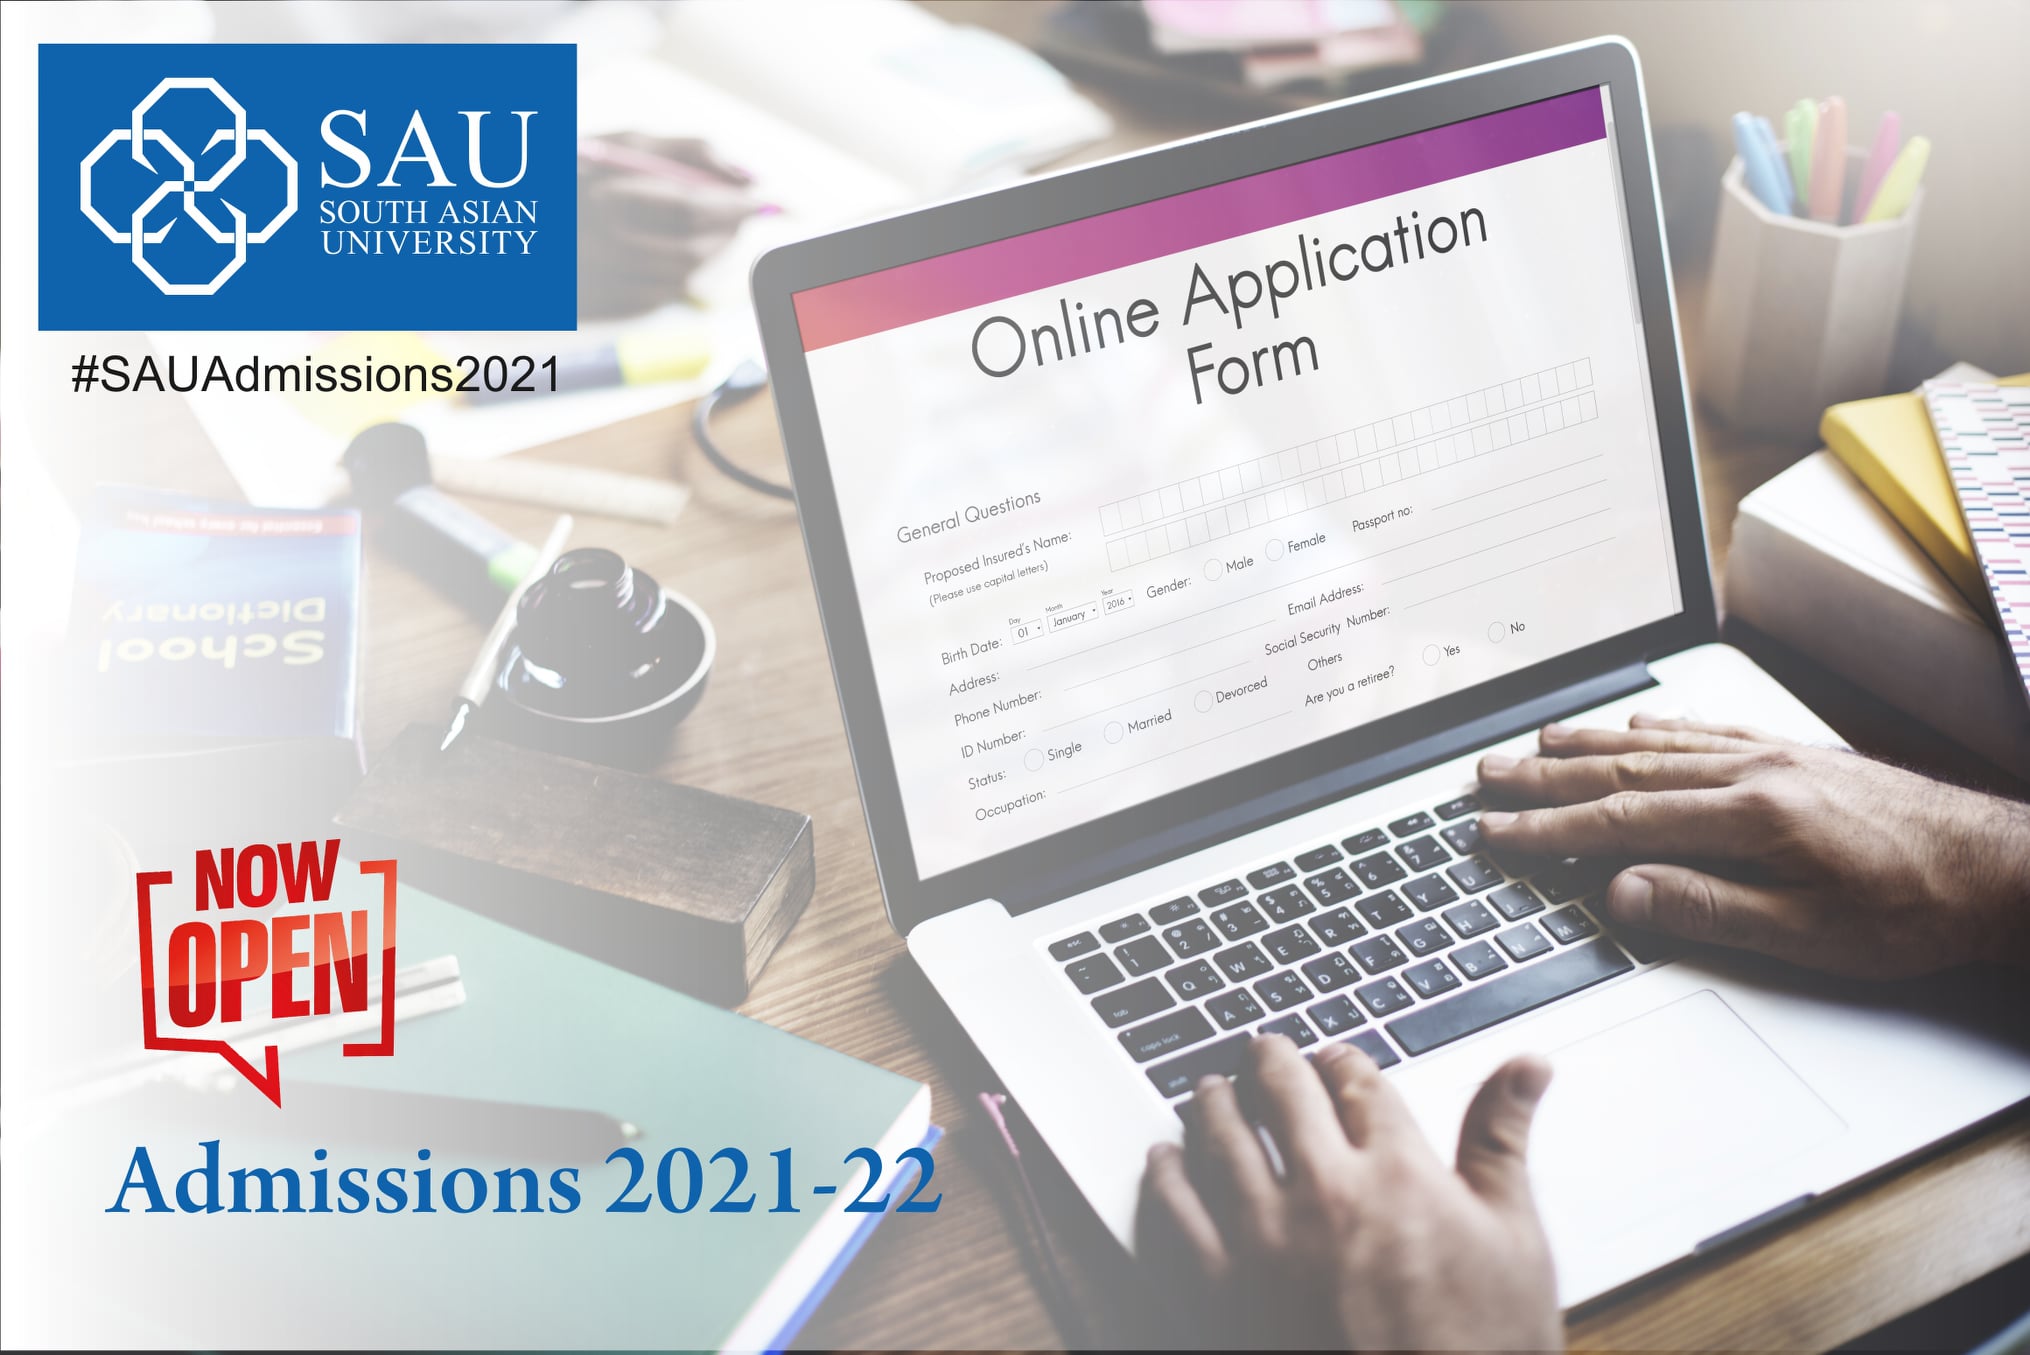 South Asian University New Delhi Announces Admission for PG & PhD Programmes AY 2020-21